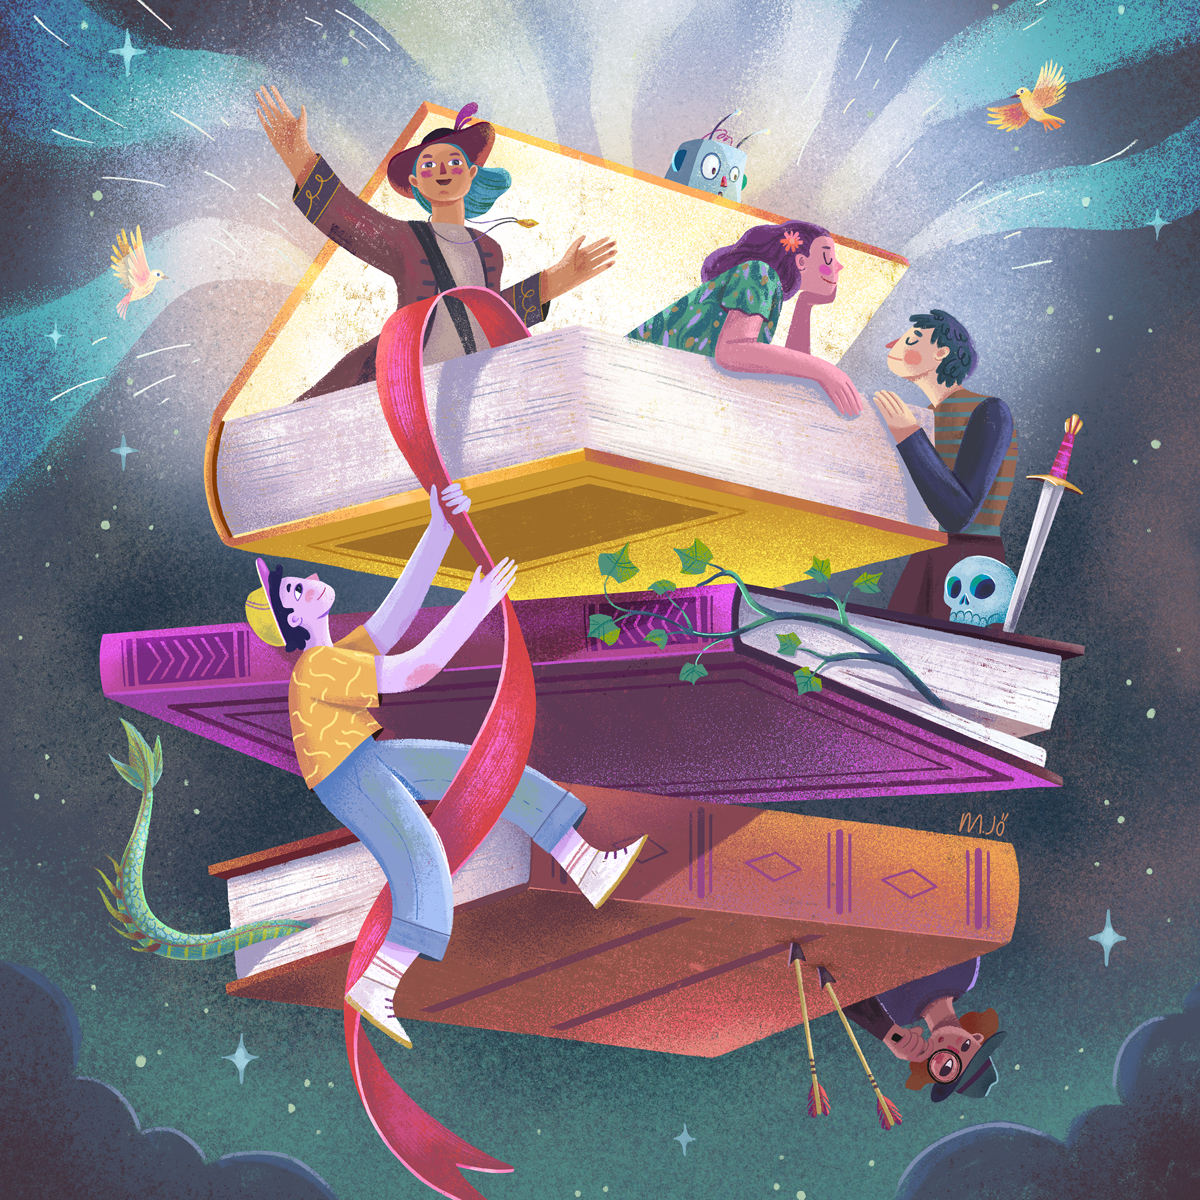 Educational illustration of a school poster by illustrator Marie-Joelle Fournier. Books come to life, revealing characters and objects from various literary genres. A character attempts to board a book by clinging onto a bookmark